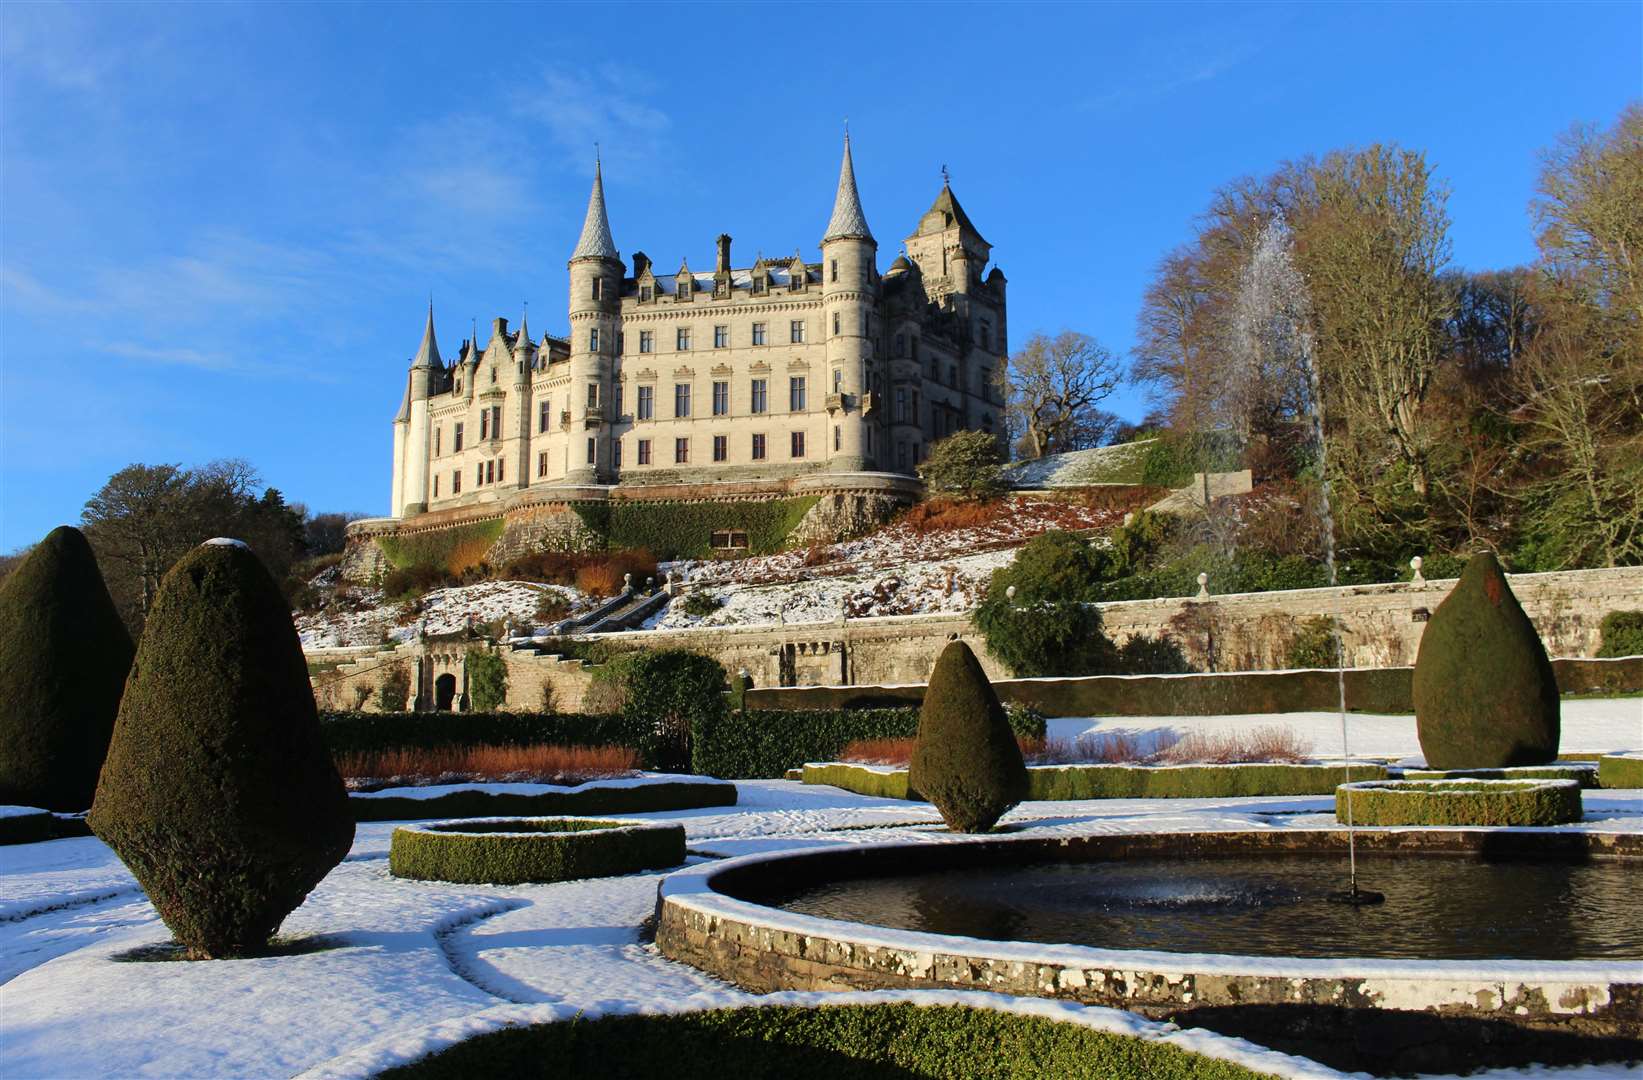 The award will be presented at Dunrobin Castle. Picture: Alan Hendry